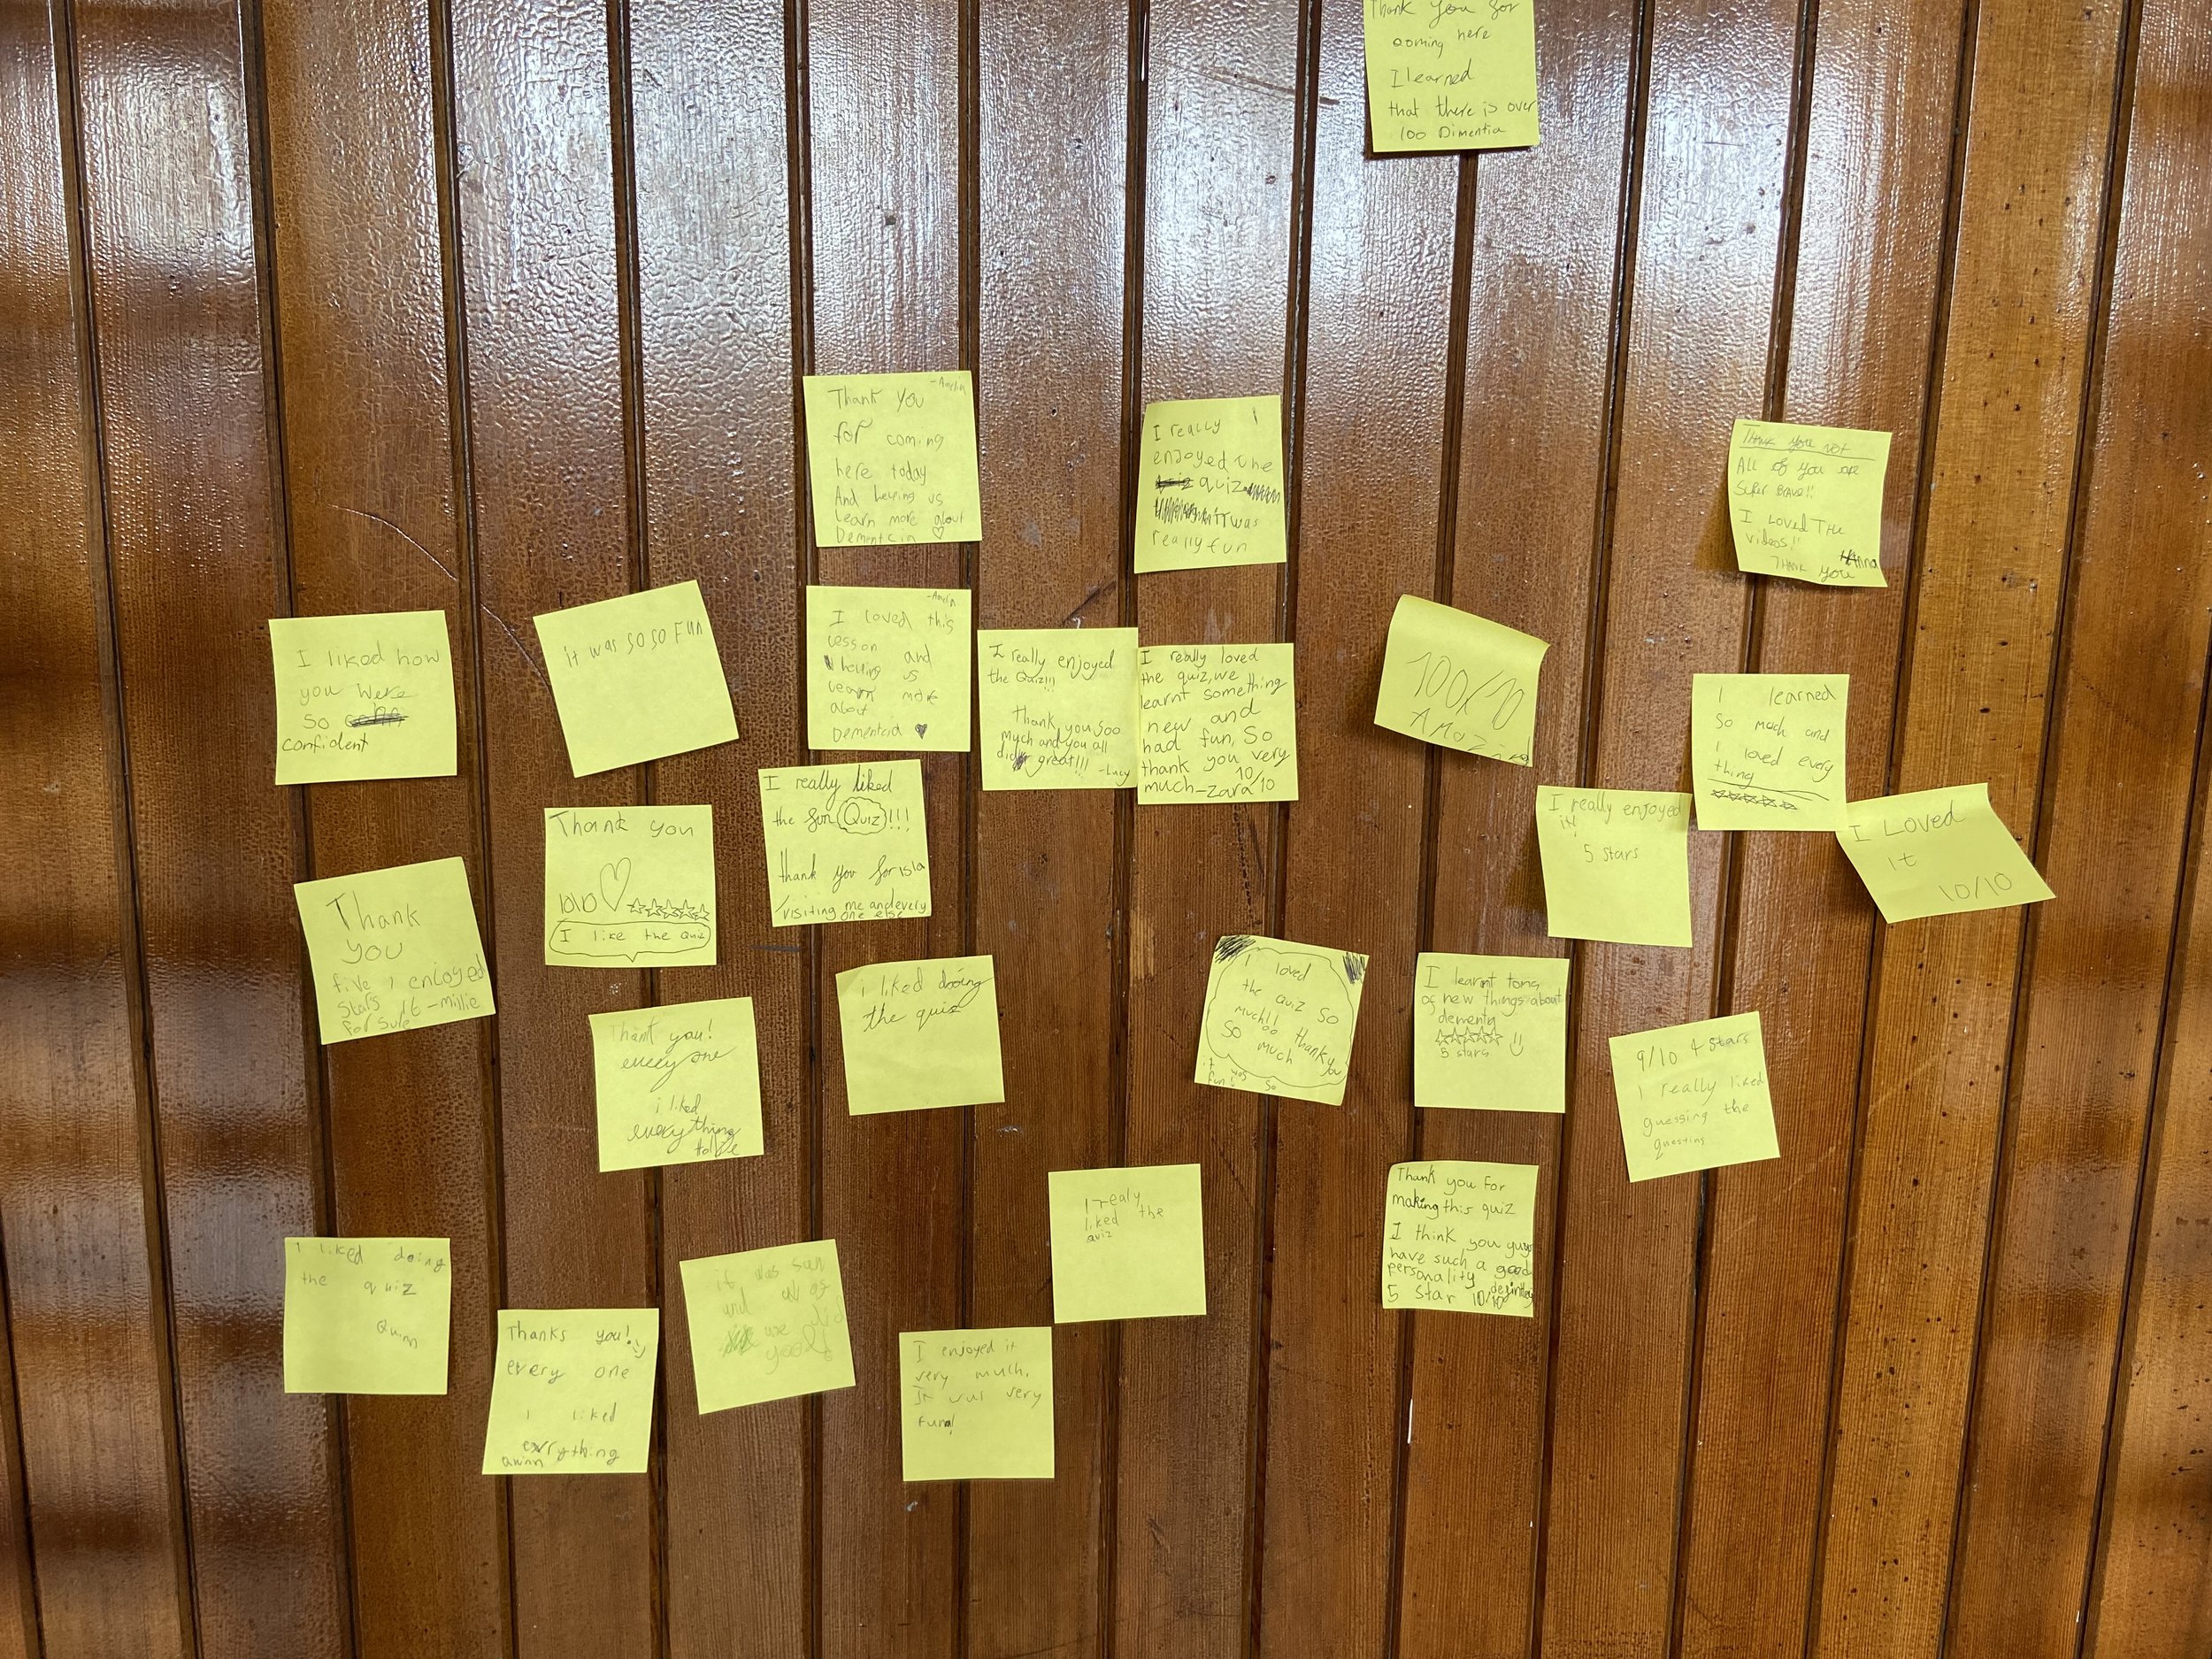 Feedback from the pupils written on sticky notes